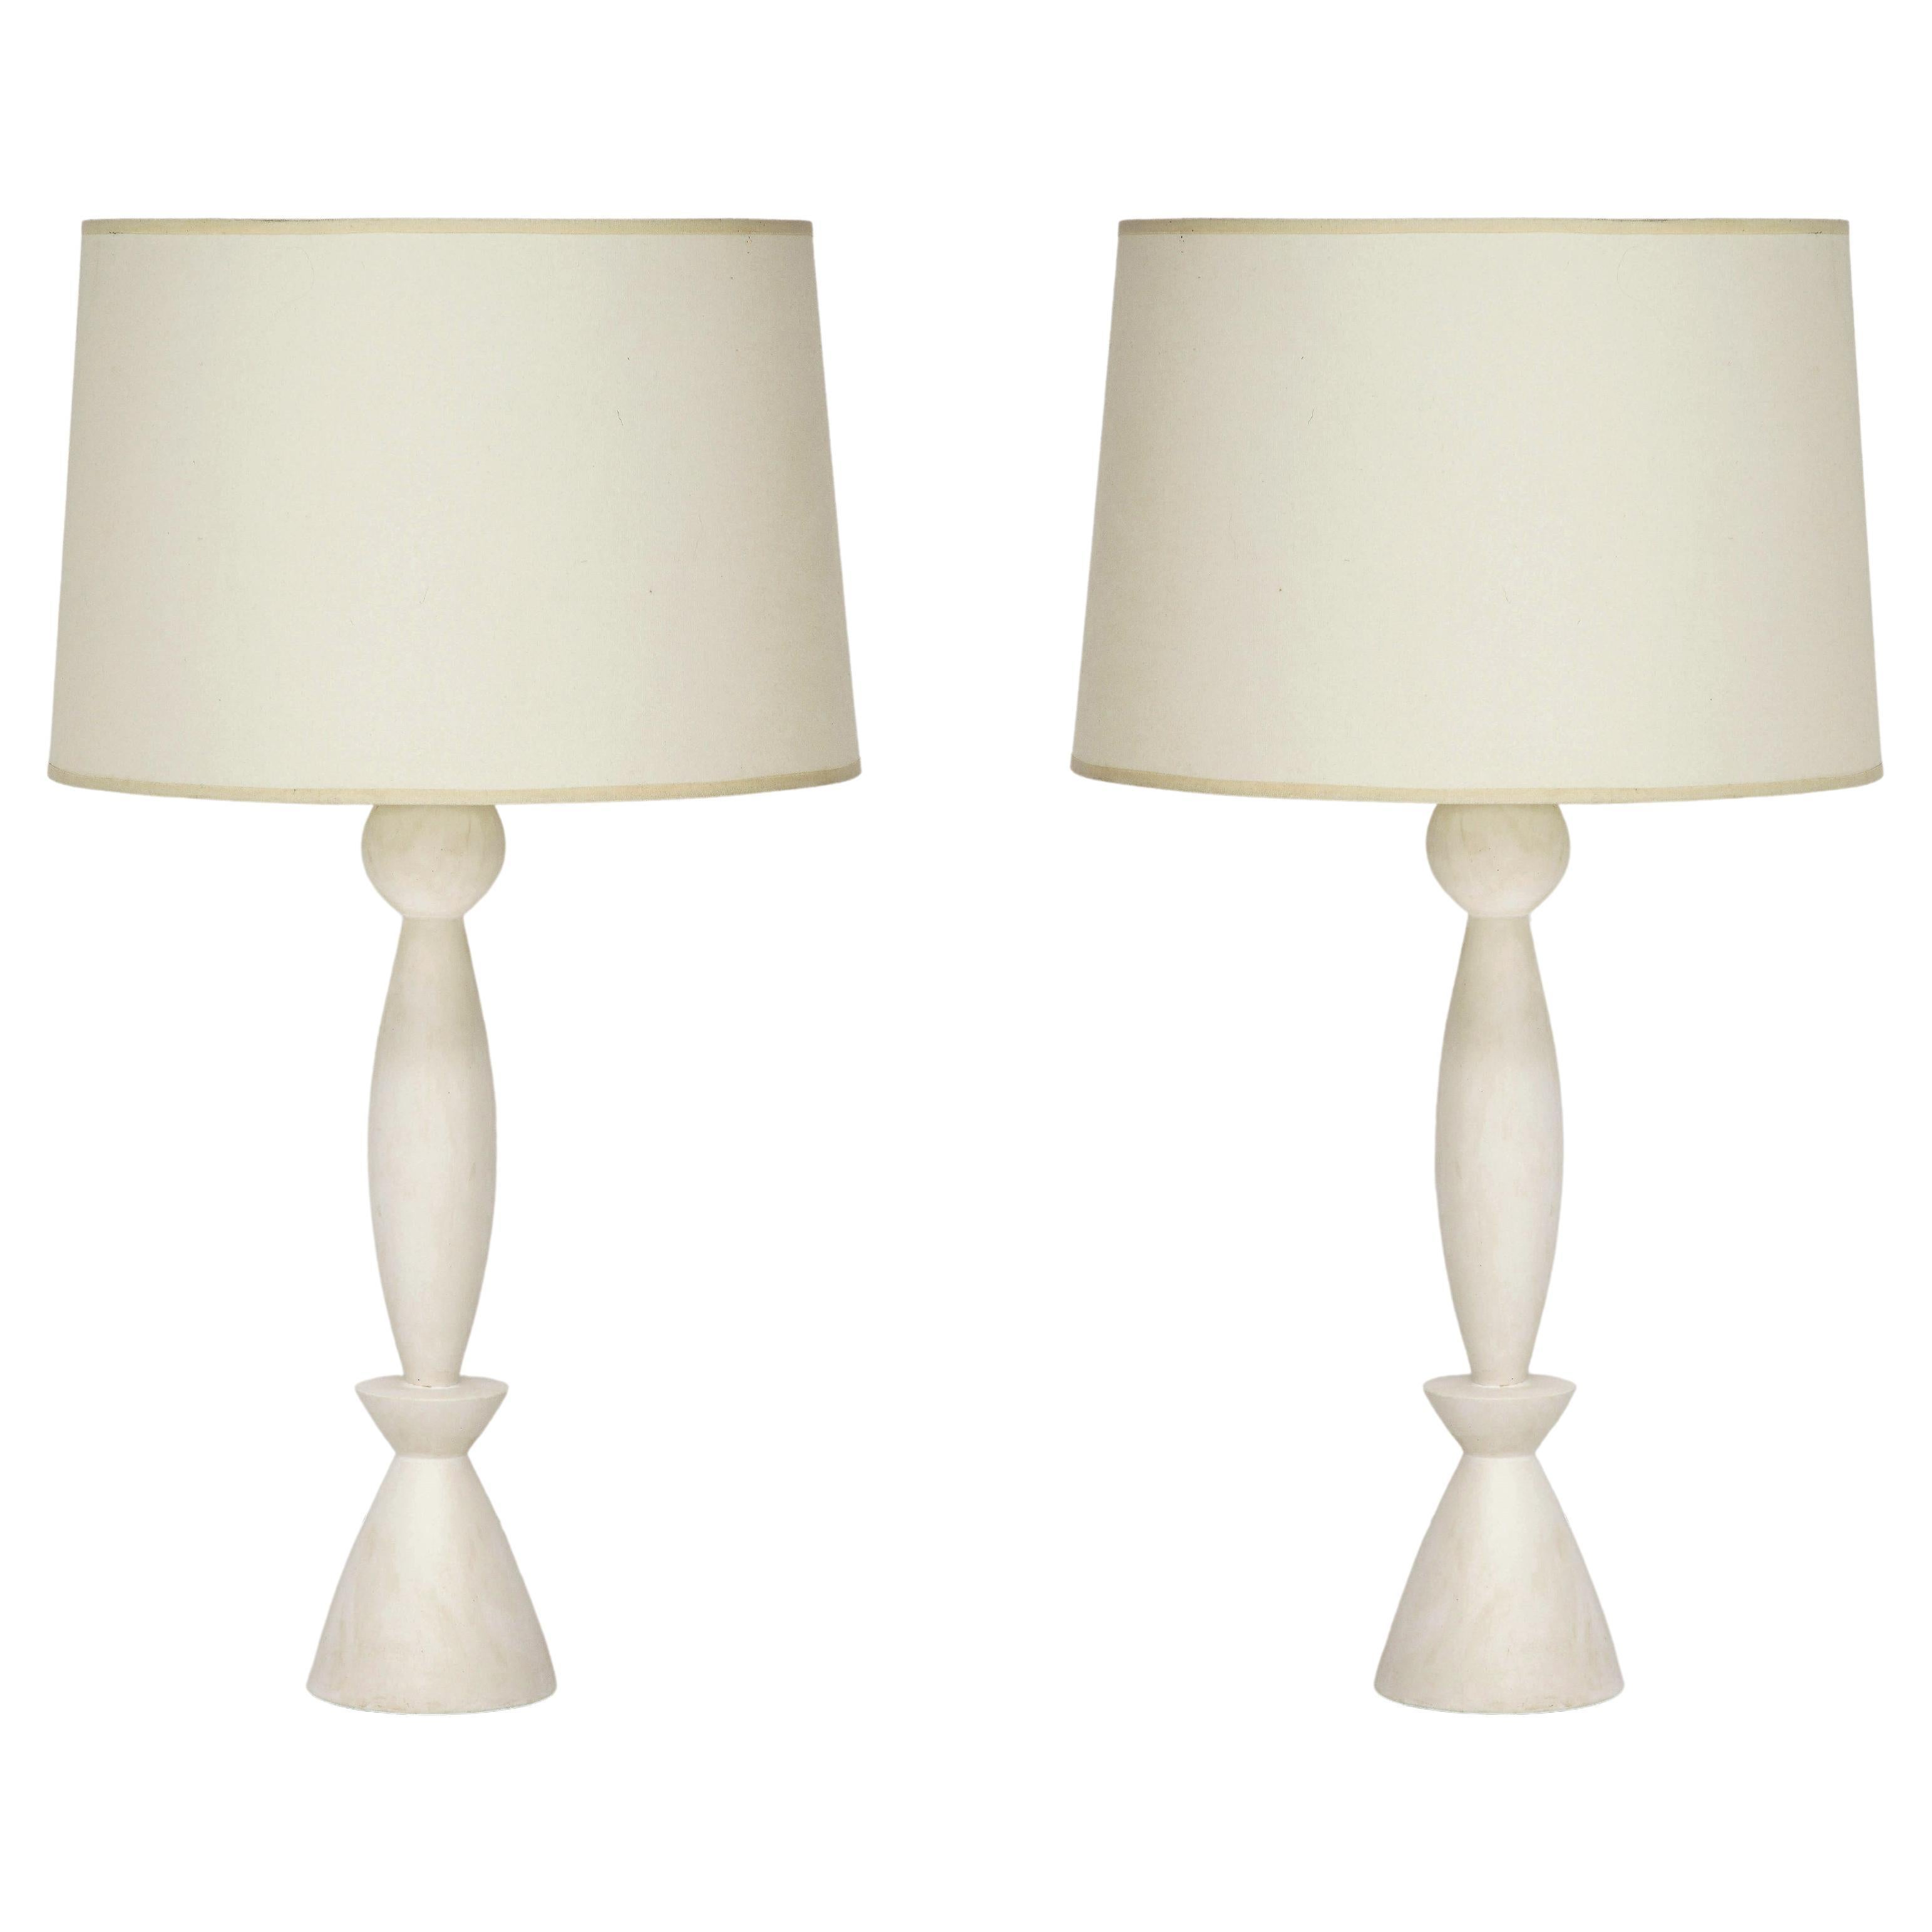 Pair of "Quille" Crème Patinated Plaster Table Lamps by Facto Atelier Paris For Sale